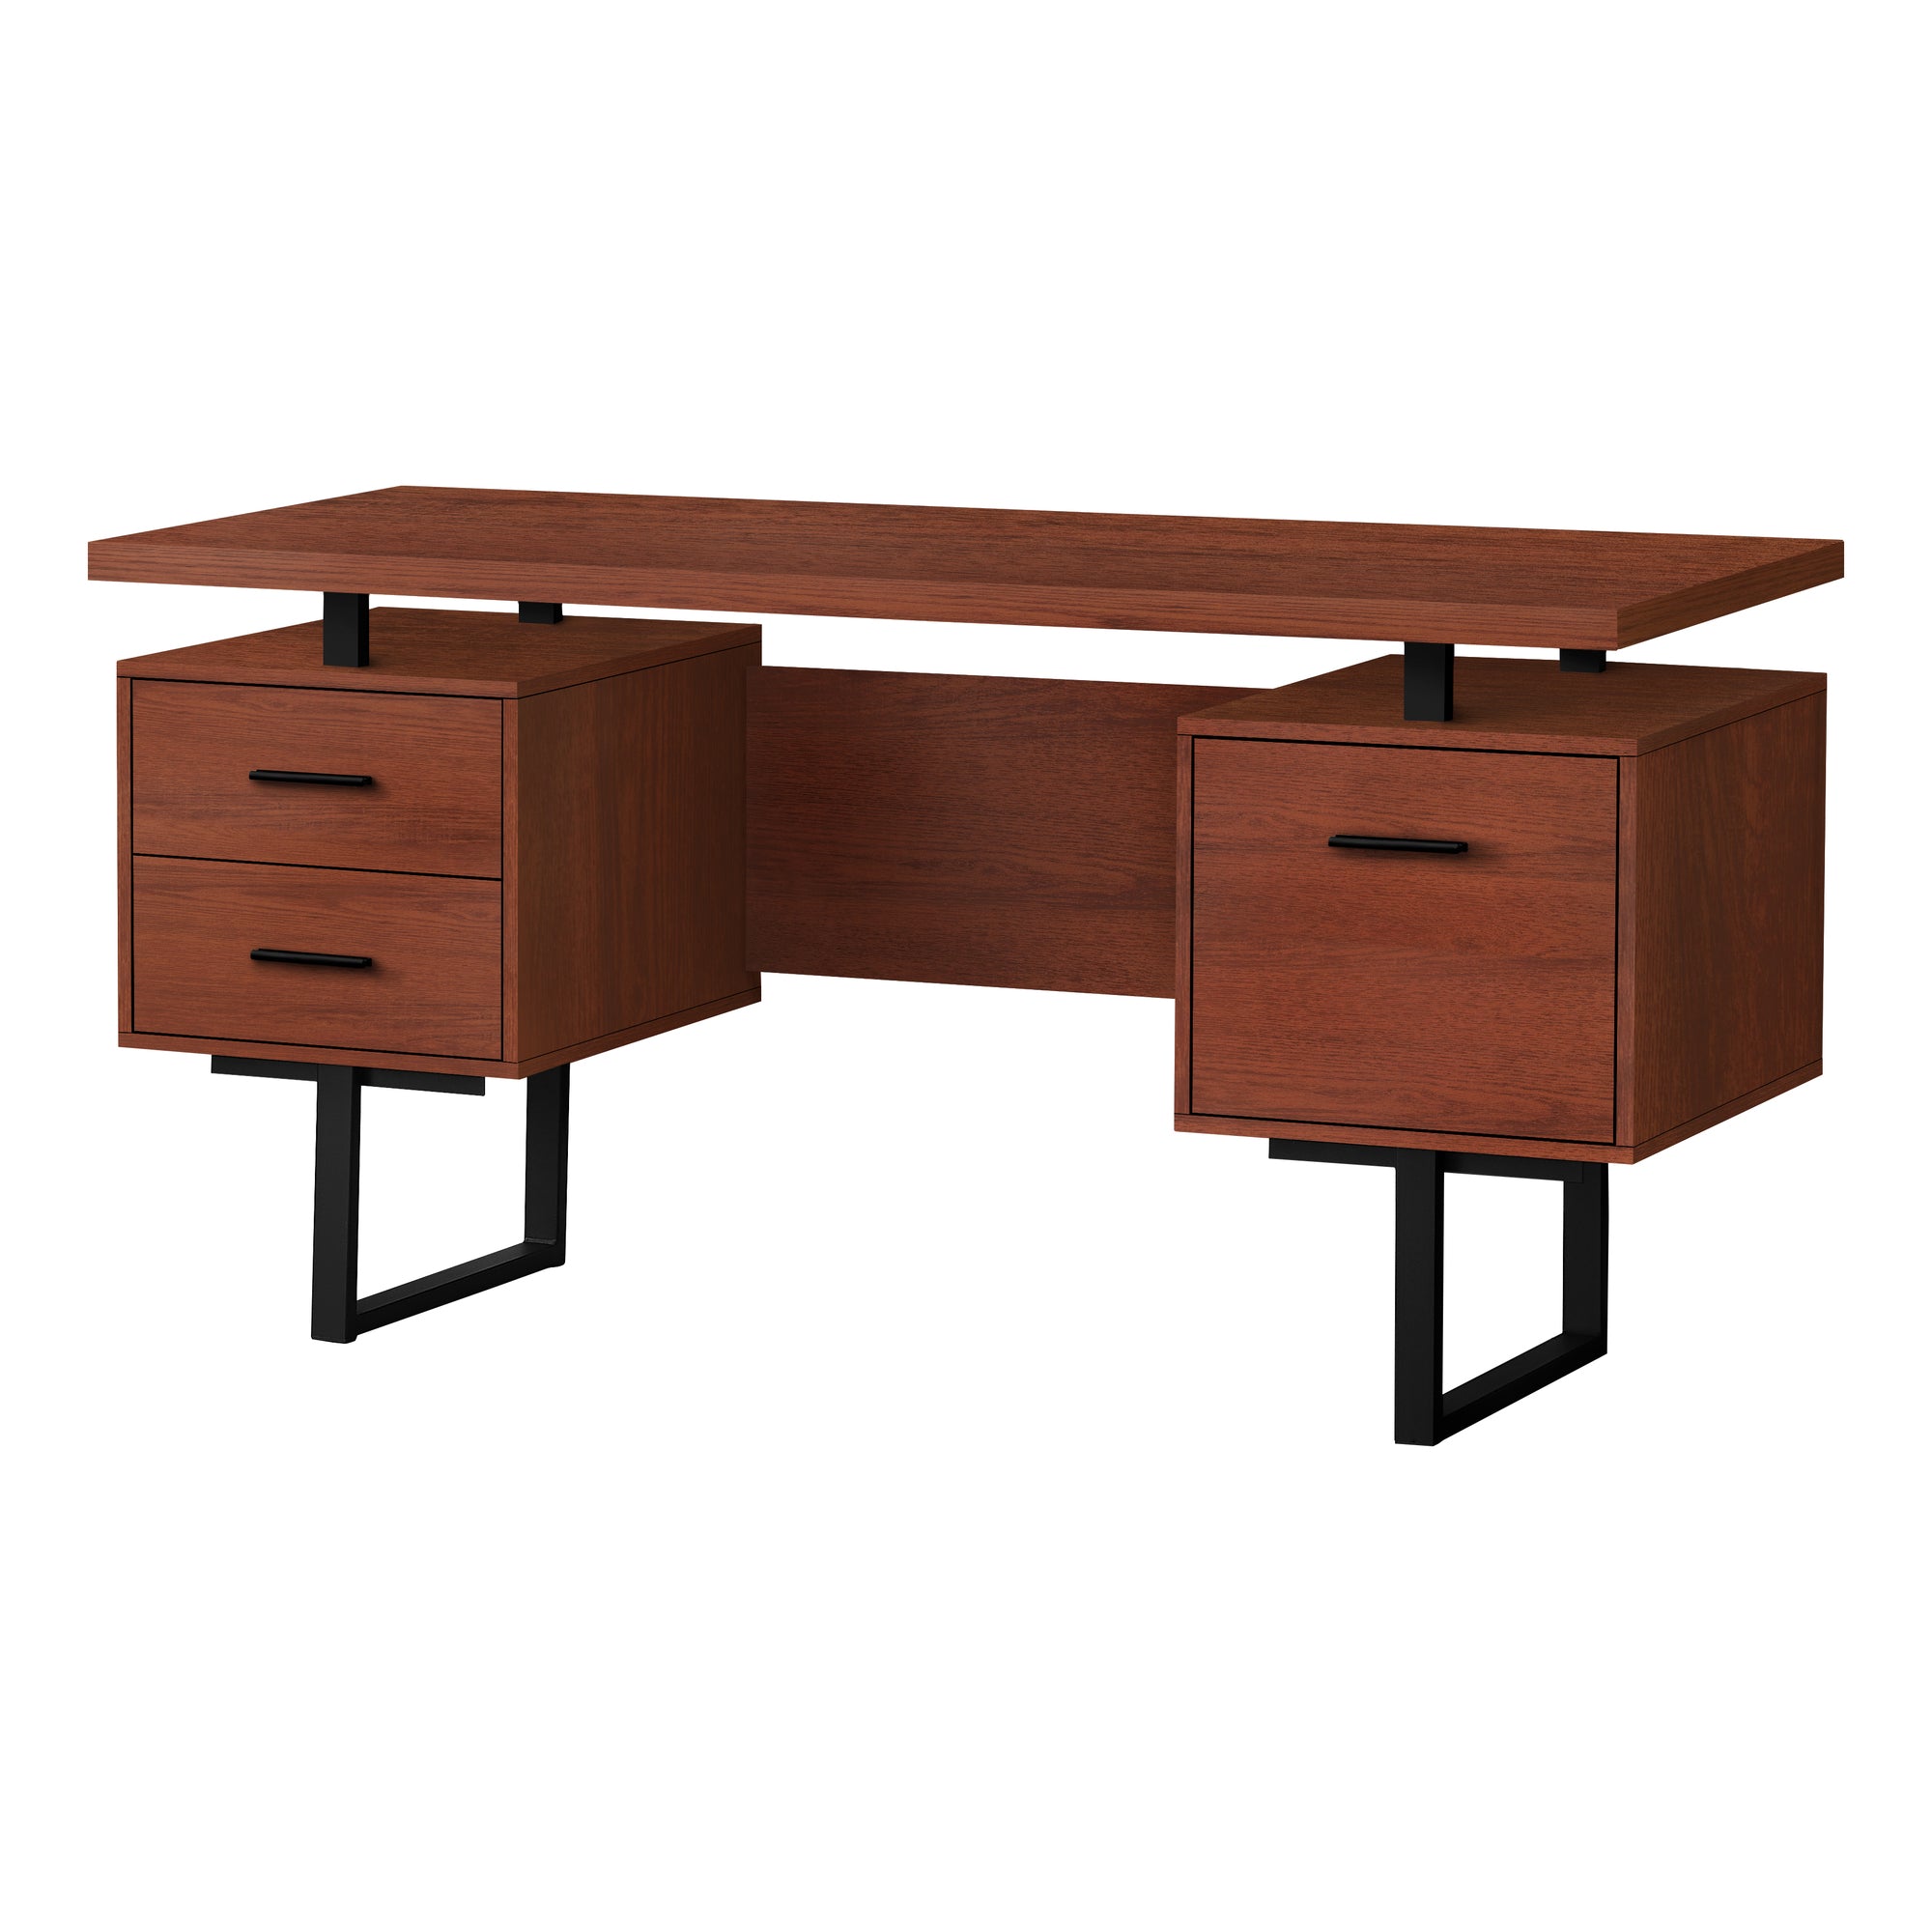 MN-377626    Computer Desk, Home Office, Laptop, Left, Right Set-Up, Storage Drawers, 60"L, Metal, Laminate, Cherry, Black, Contemporary, Modern